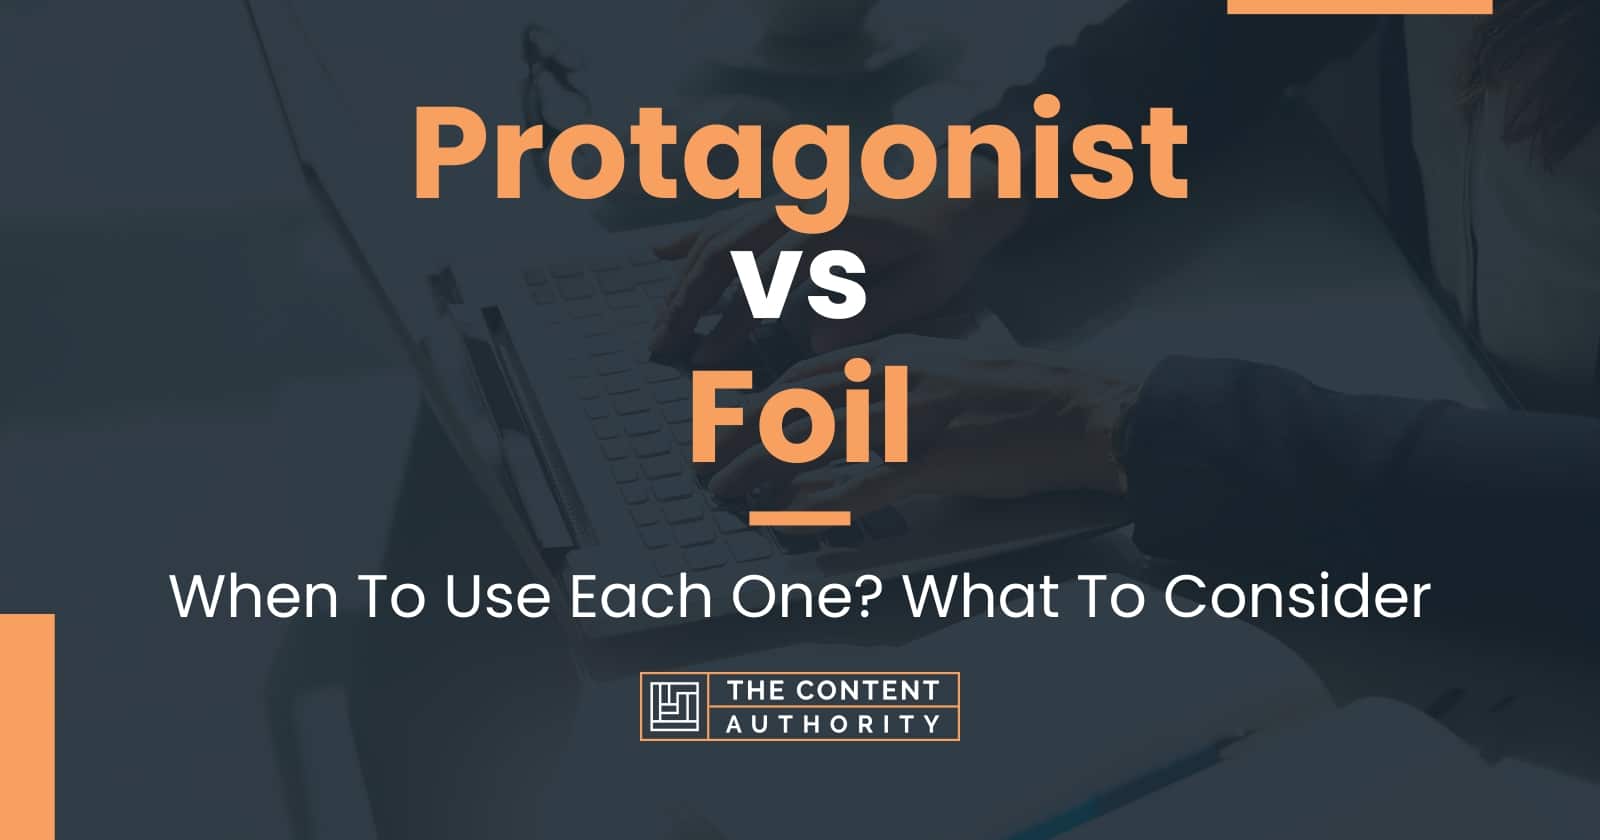 Protagonist vs Foil: When To Use Each One? What To Consider